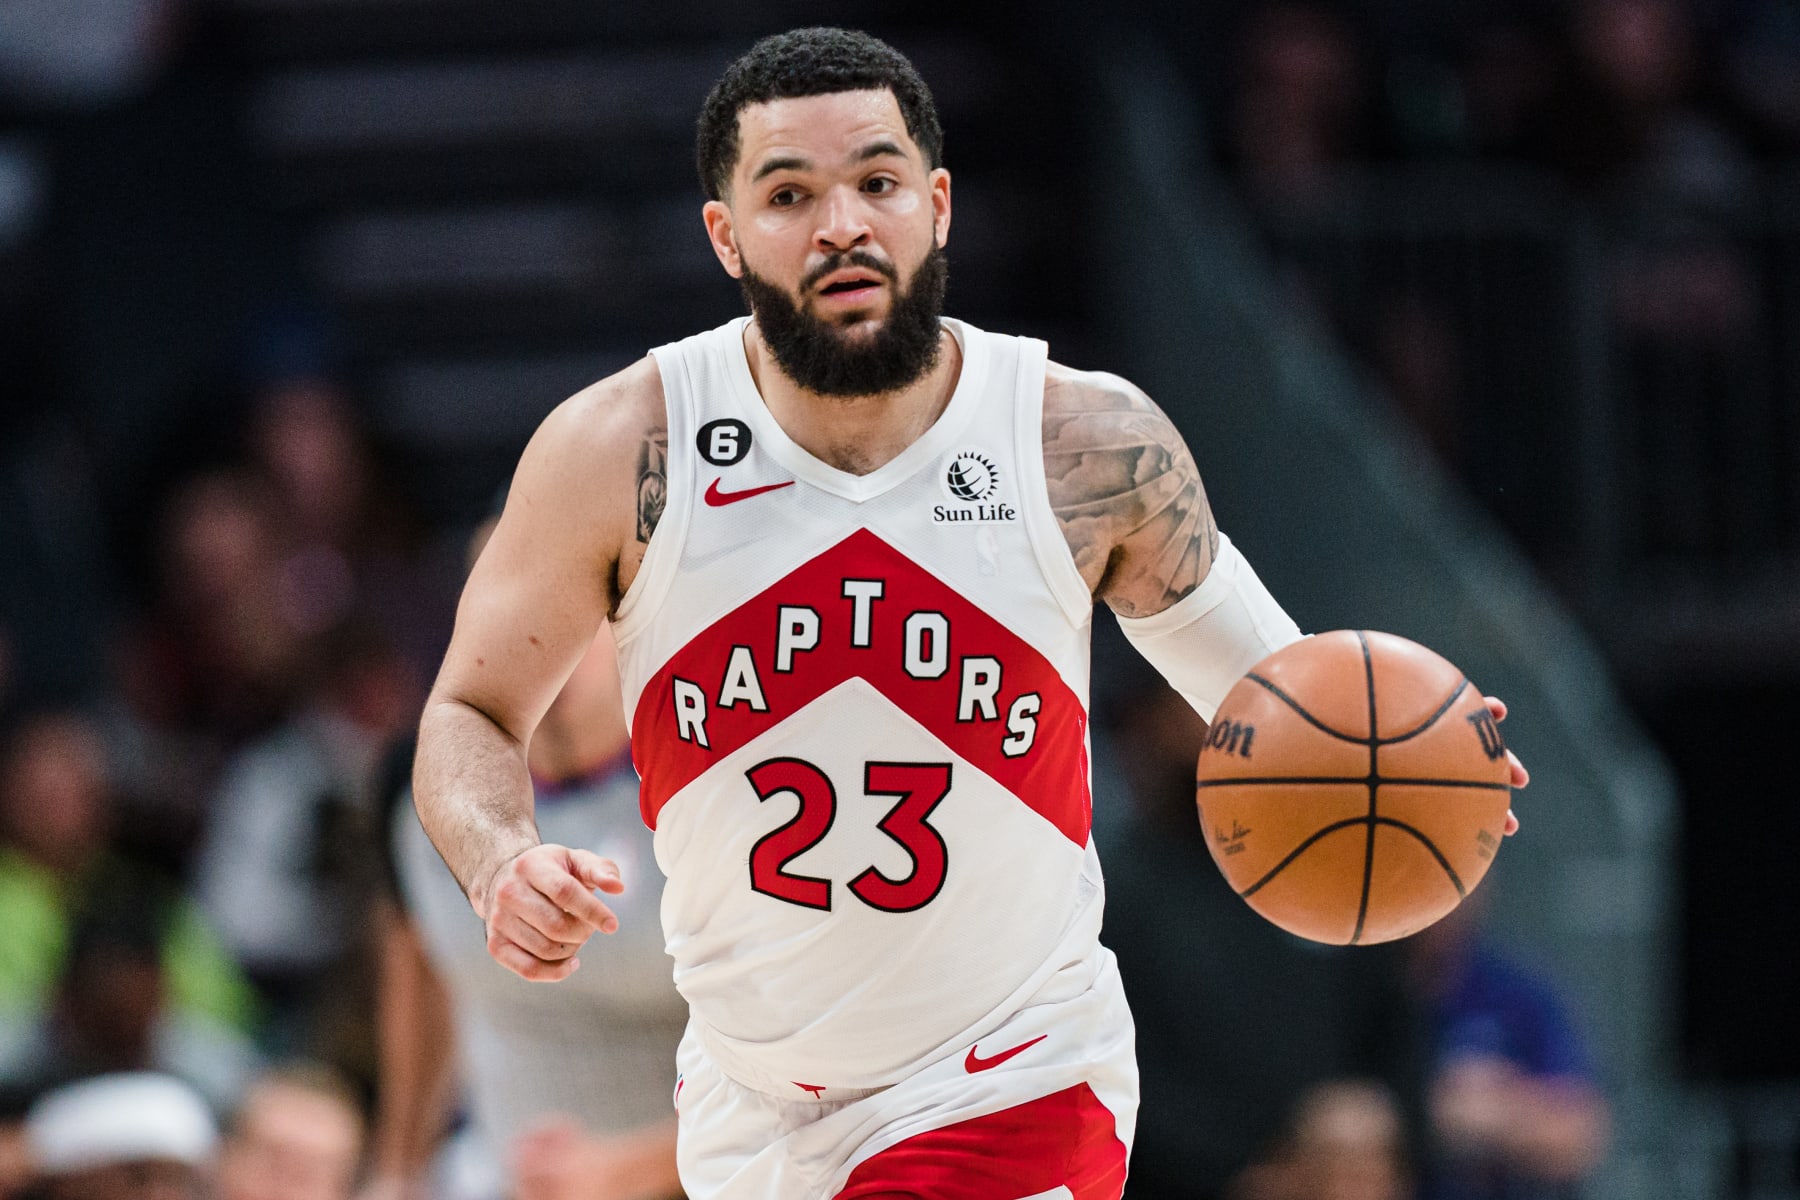 Report: Fred VanVleet likely headed to the Houston Rockets